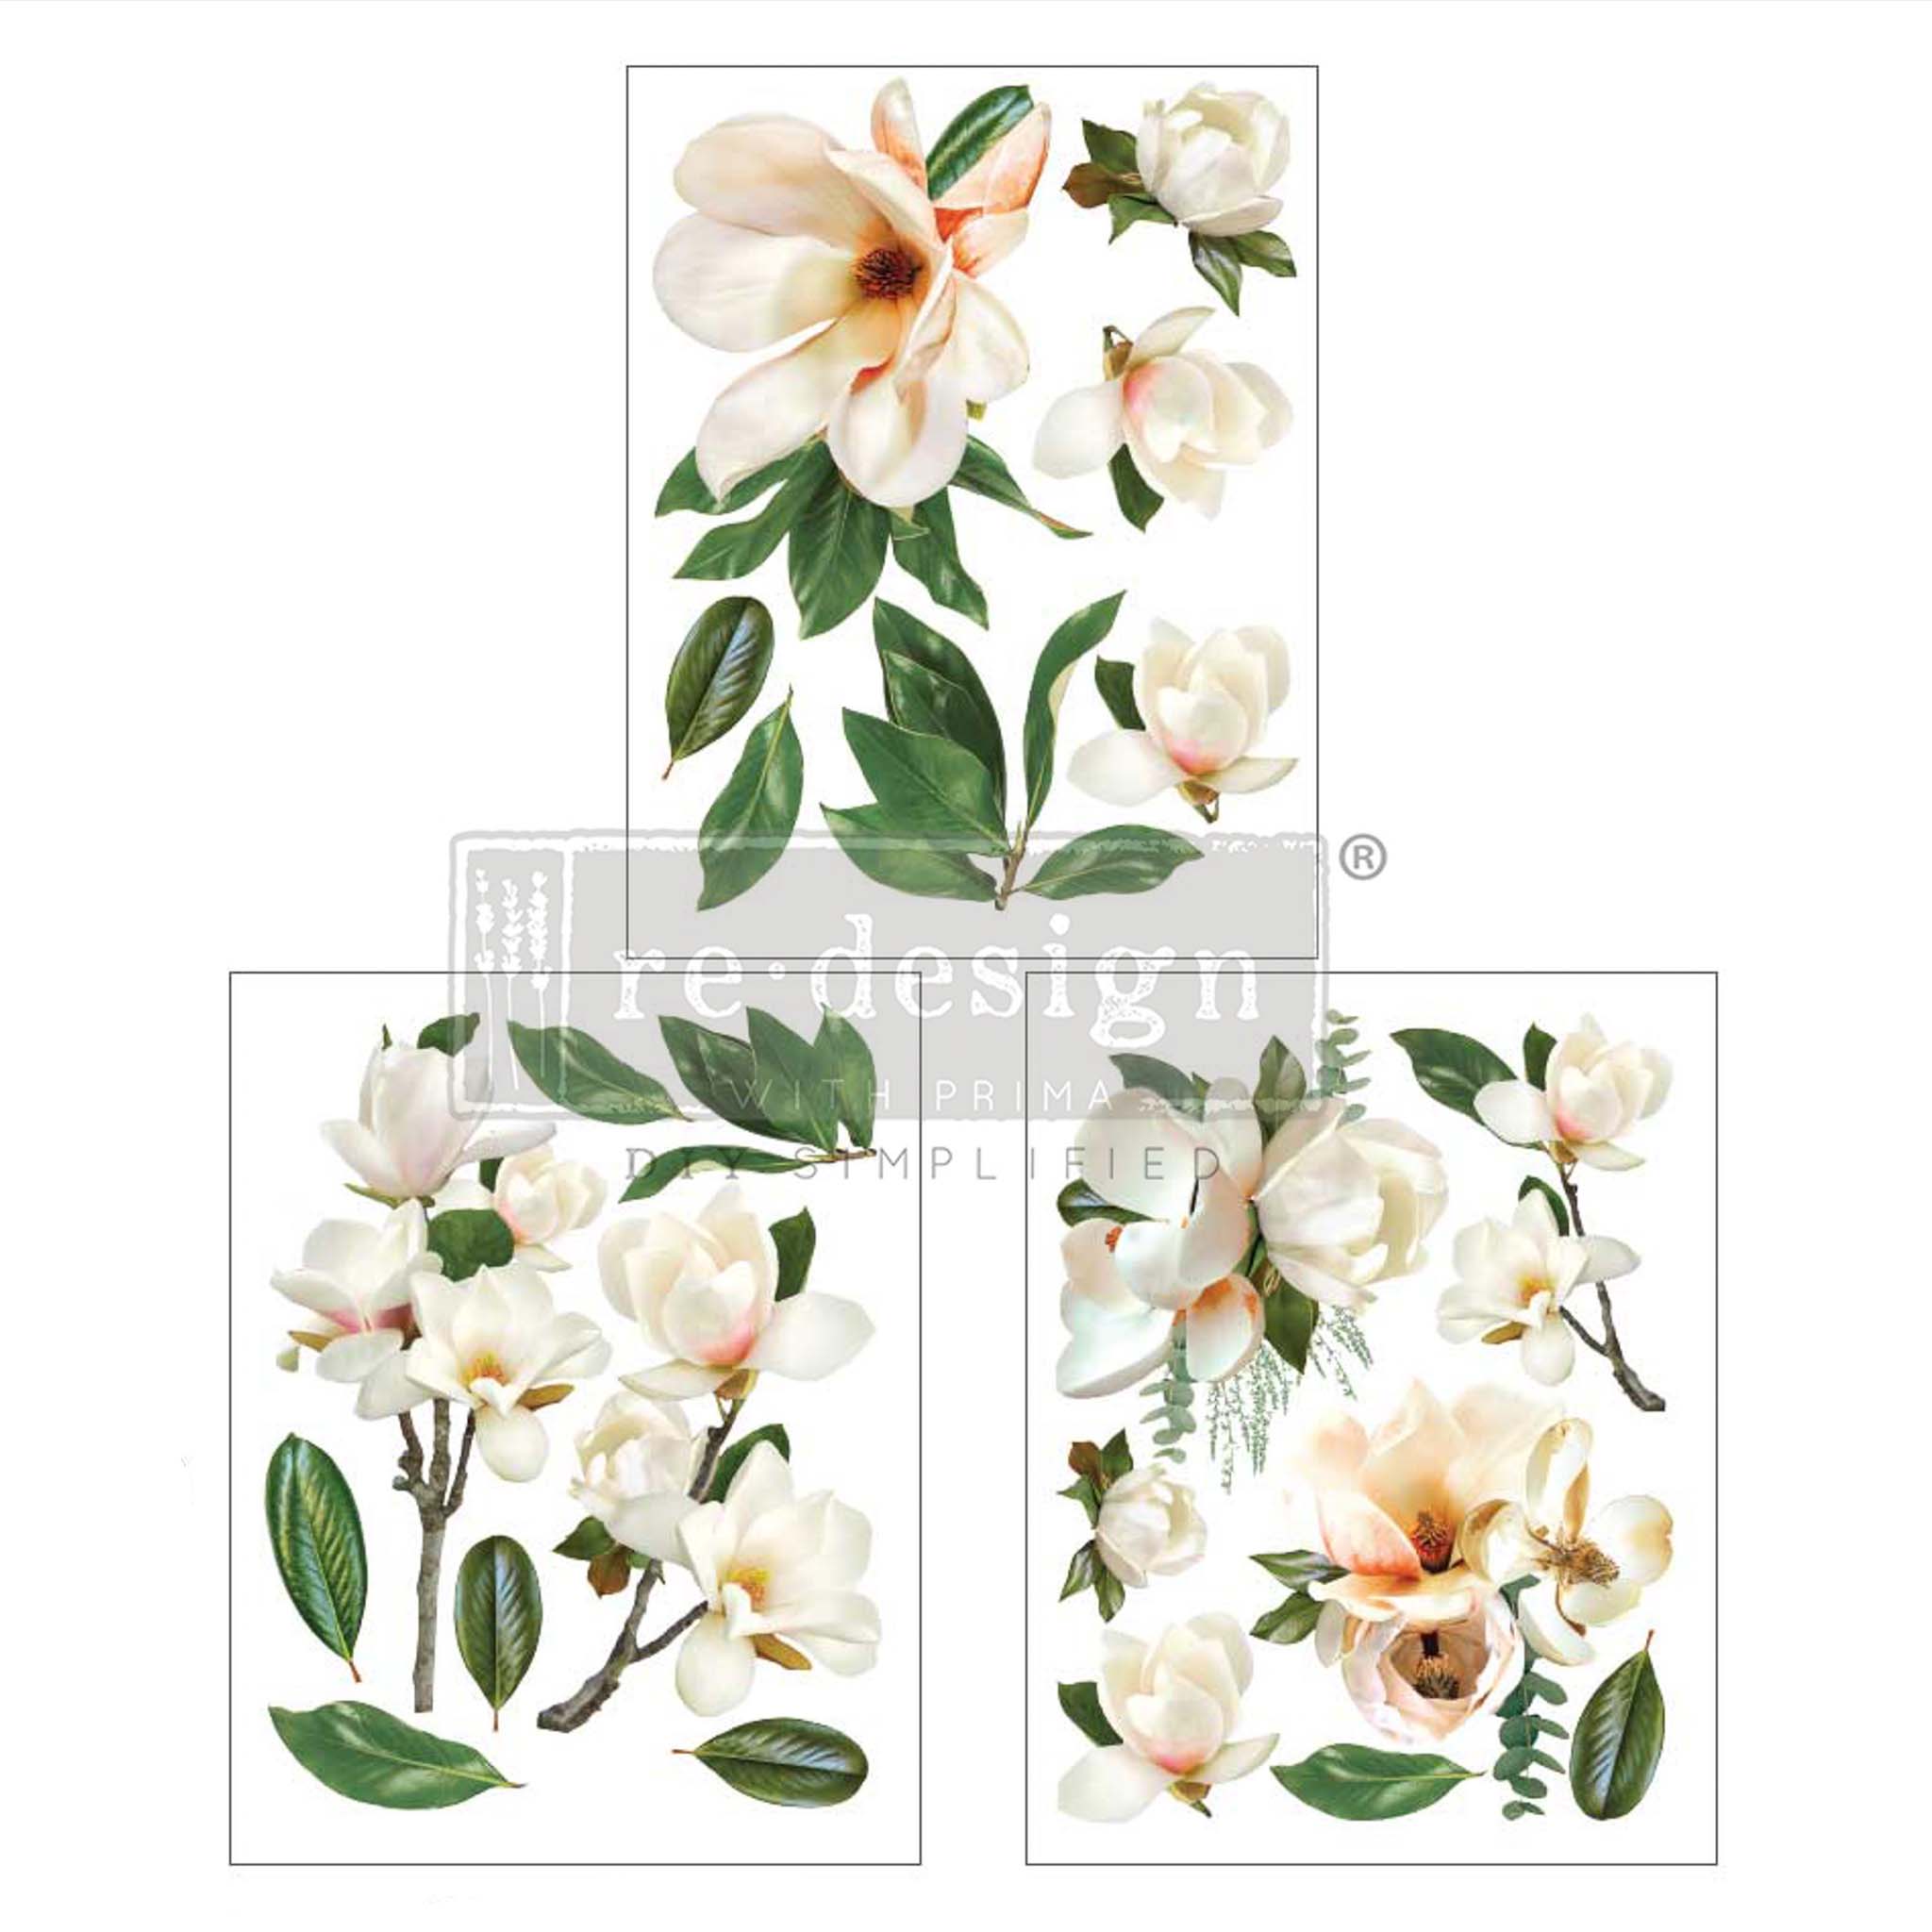 Small rub-on transfer design that features gorgeous jumbo magnolia blooms in creamy tones set among lush deep green leaves.